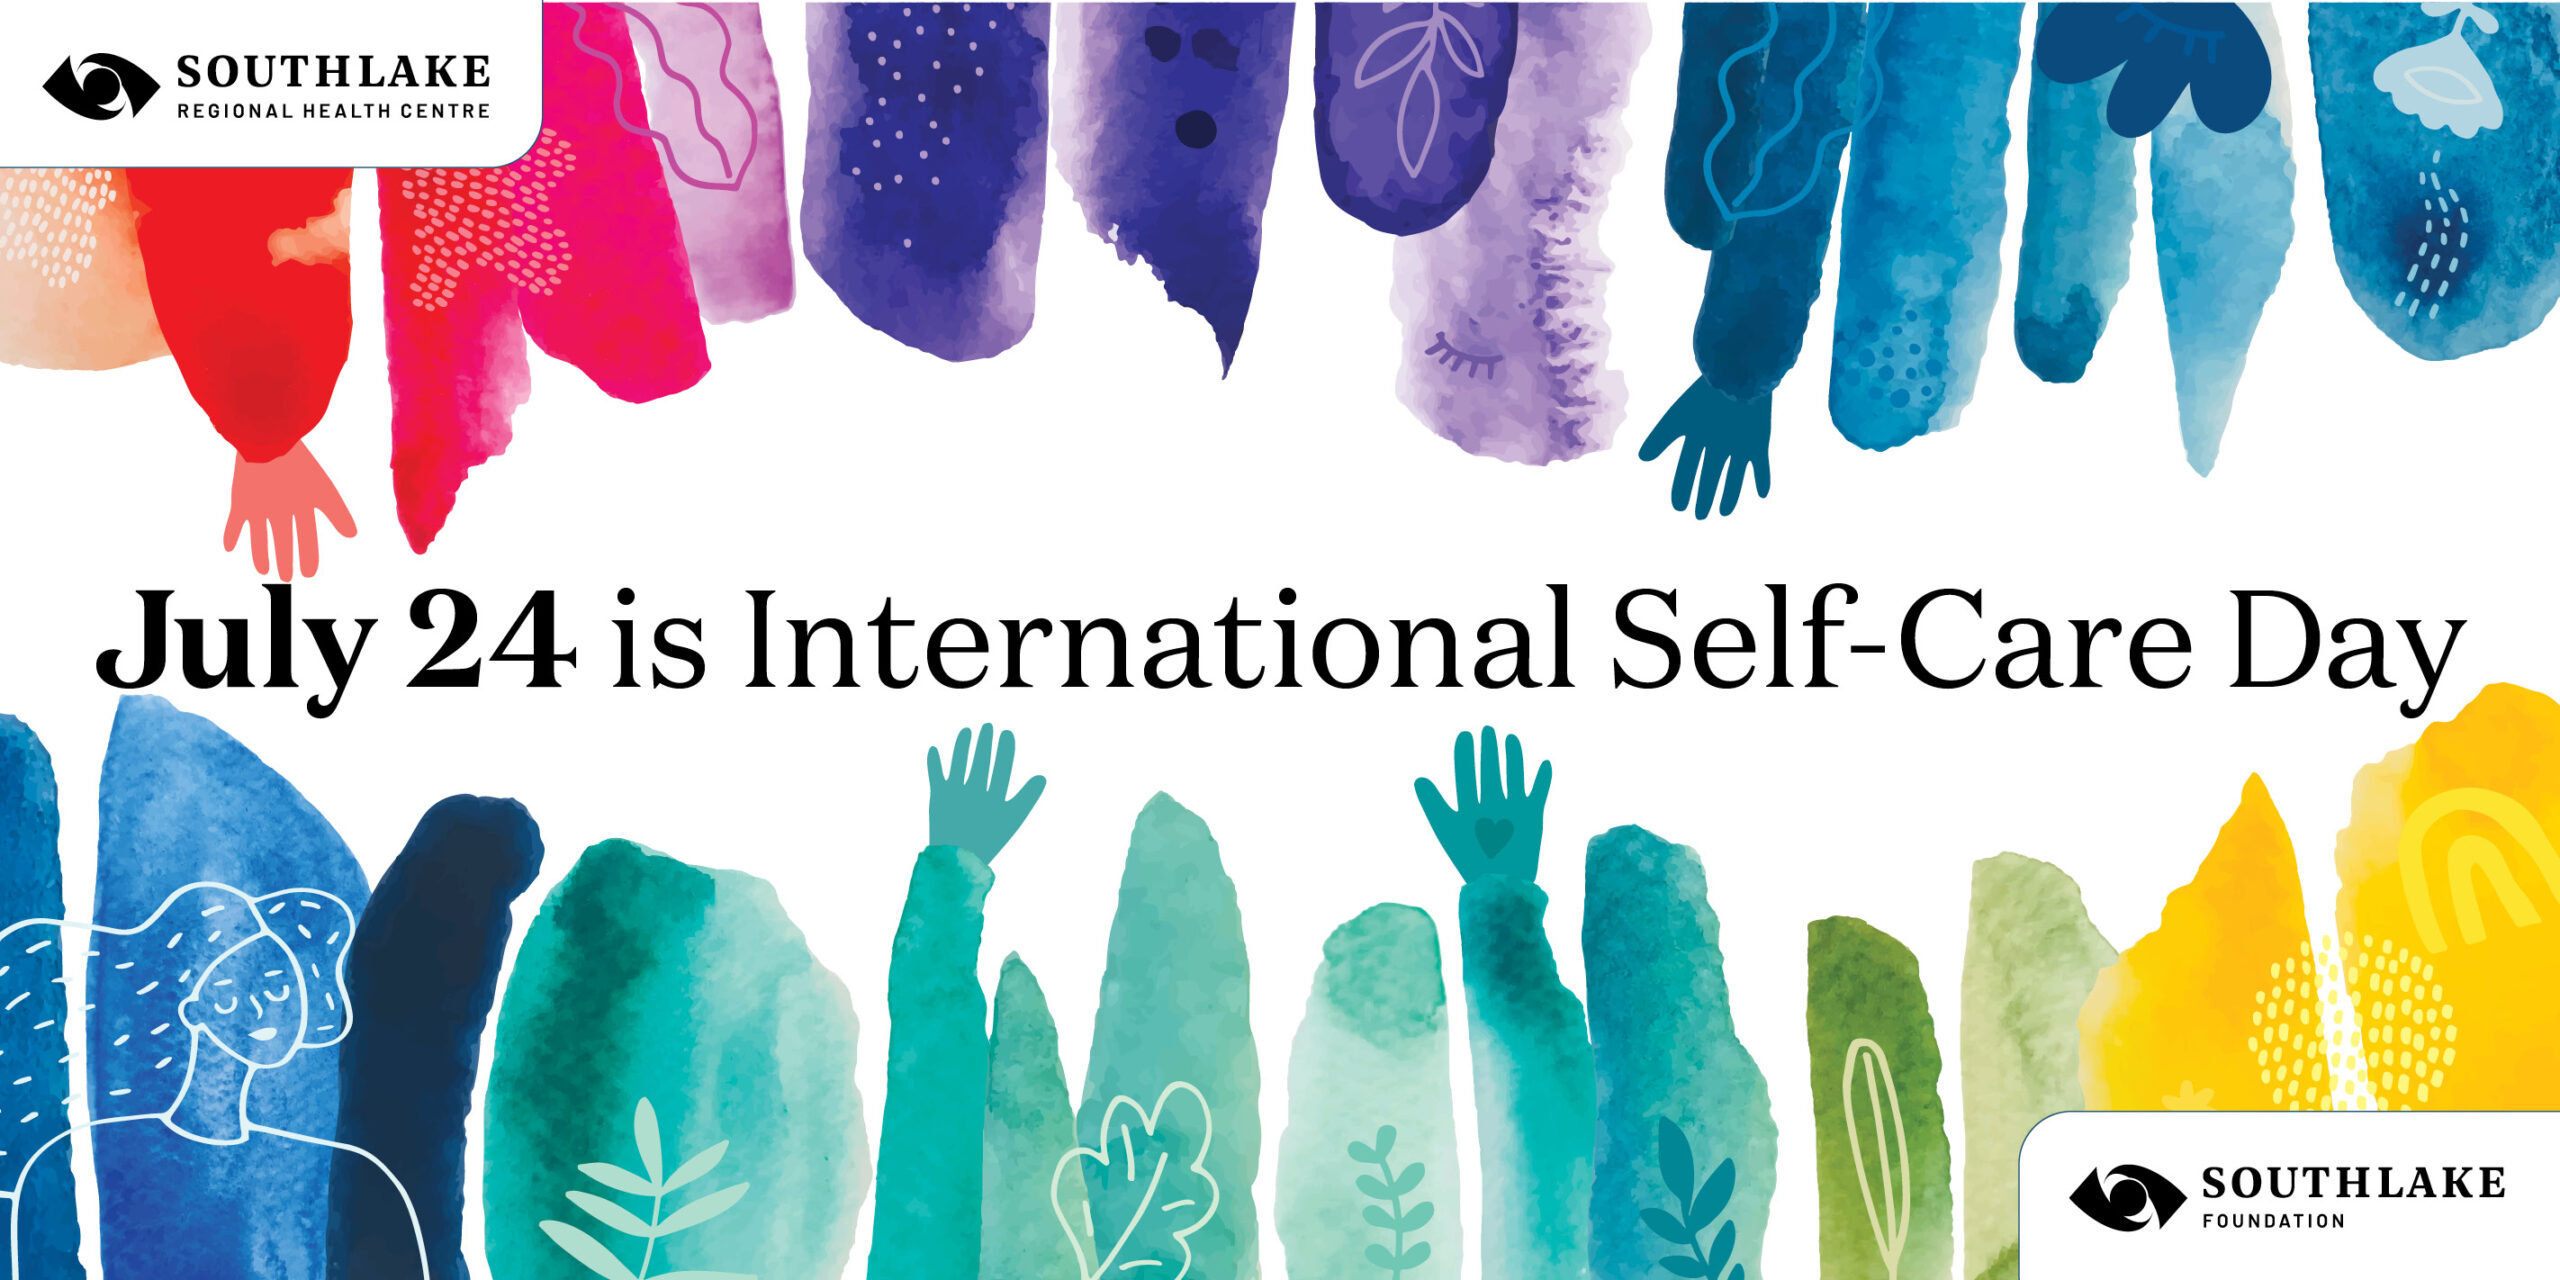 show-love-to-yourself-on-international-self-care-day-southlake